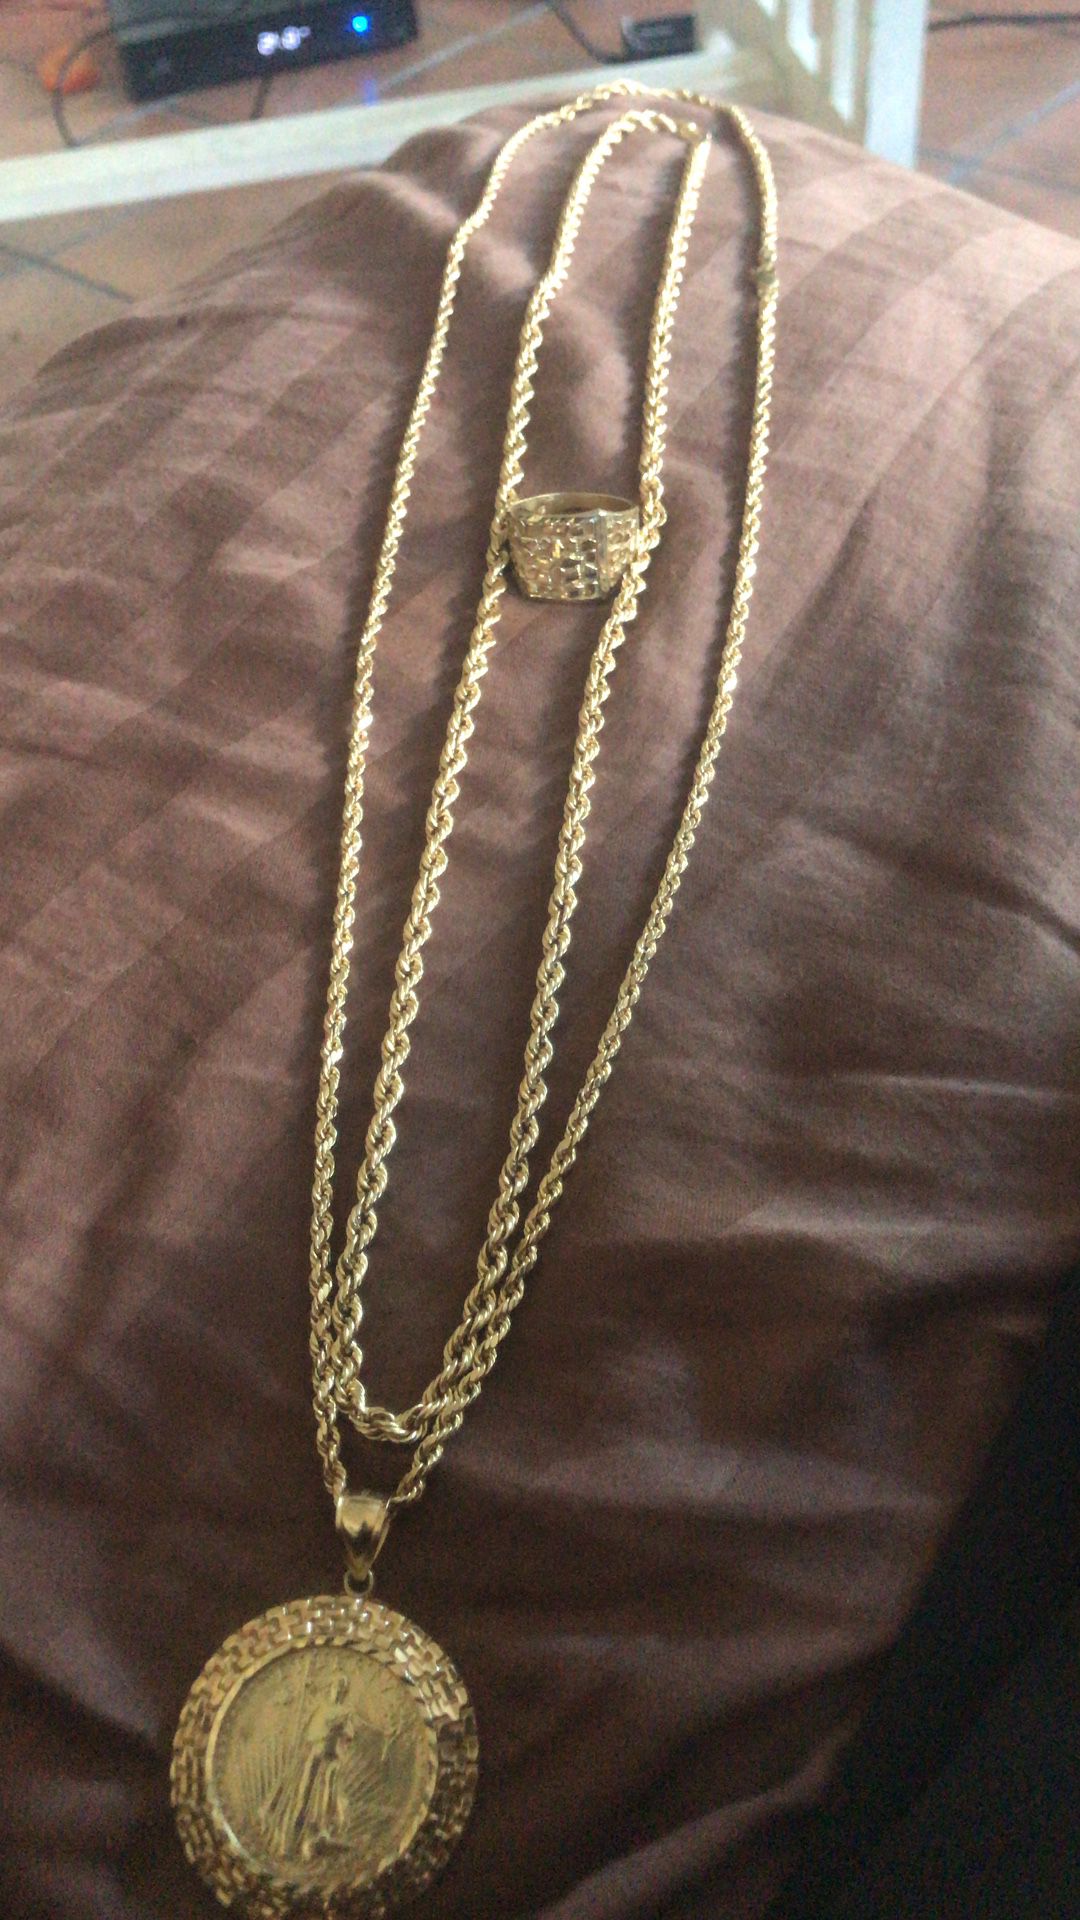 10k and 14k gold chains and ring